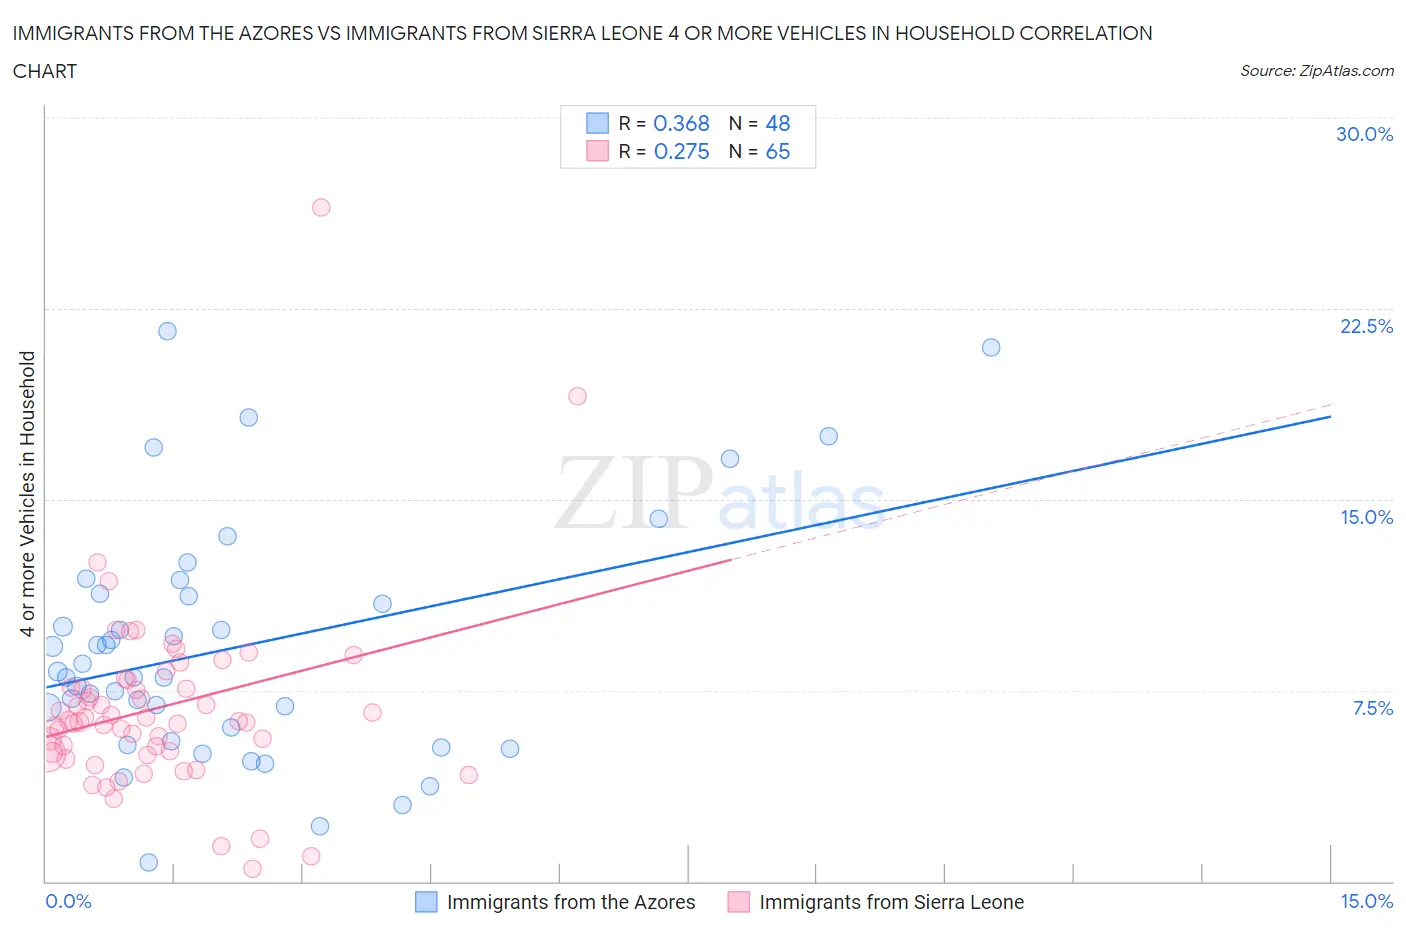 Immigrants from the Azores vs Immigrants from Sierra Leone 4 or more Vehicles in Household